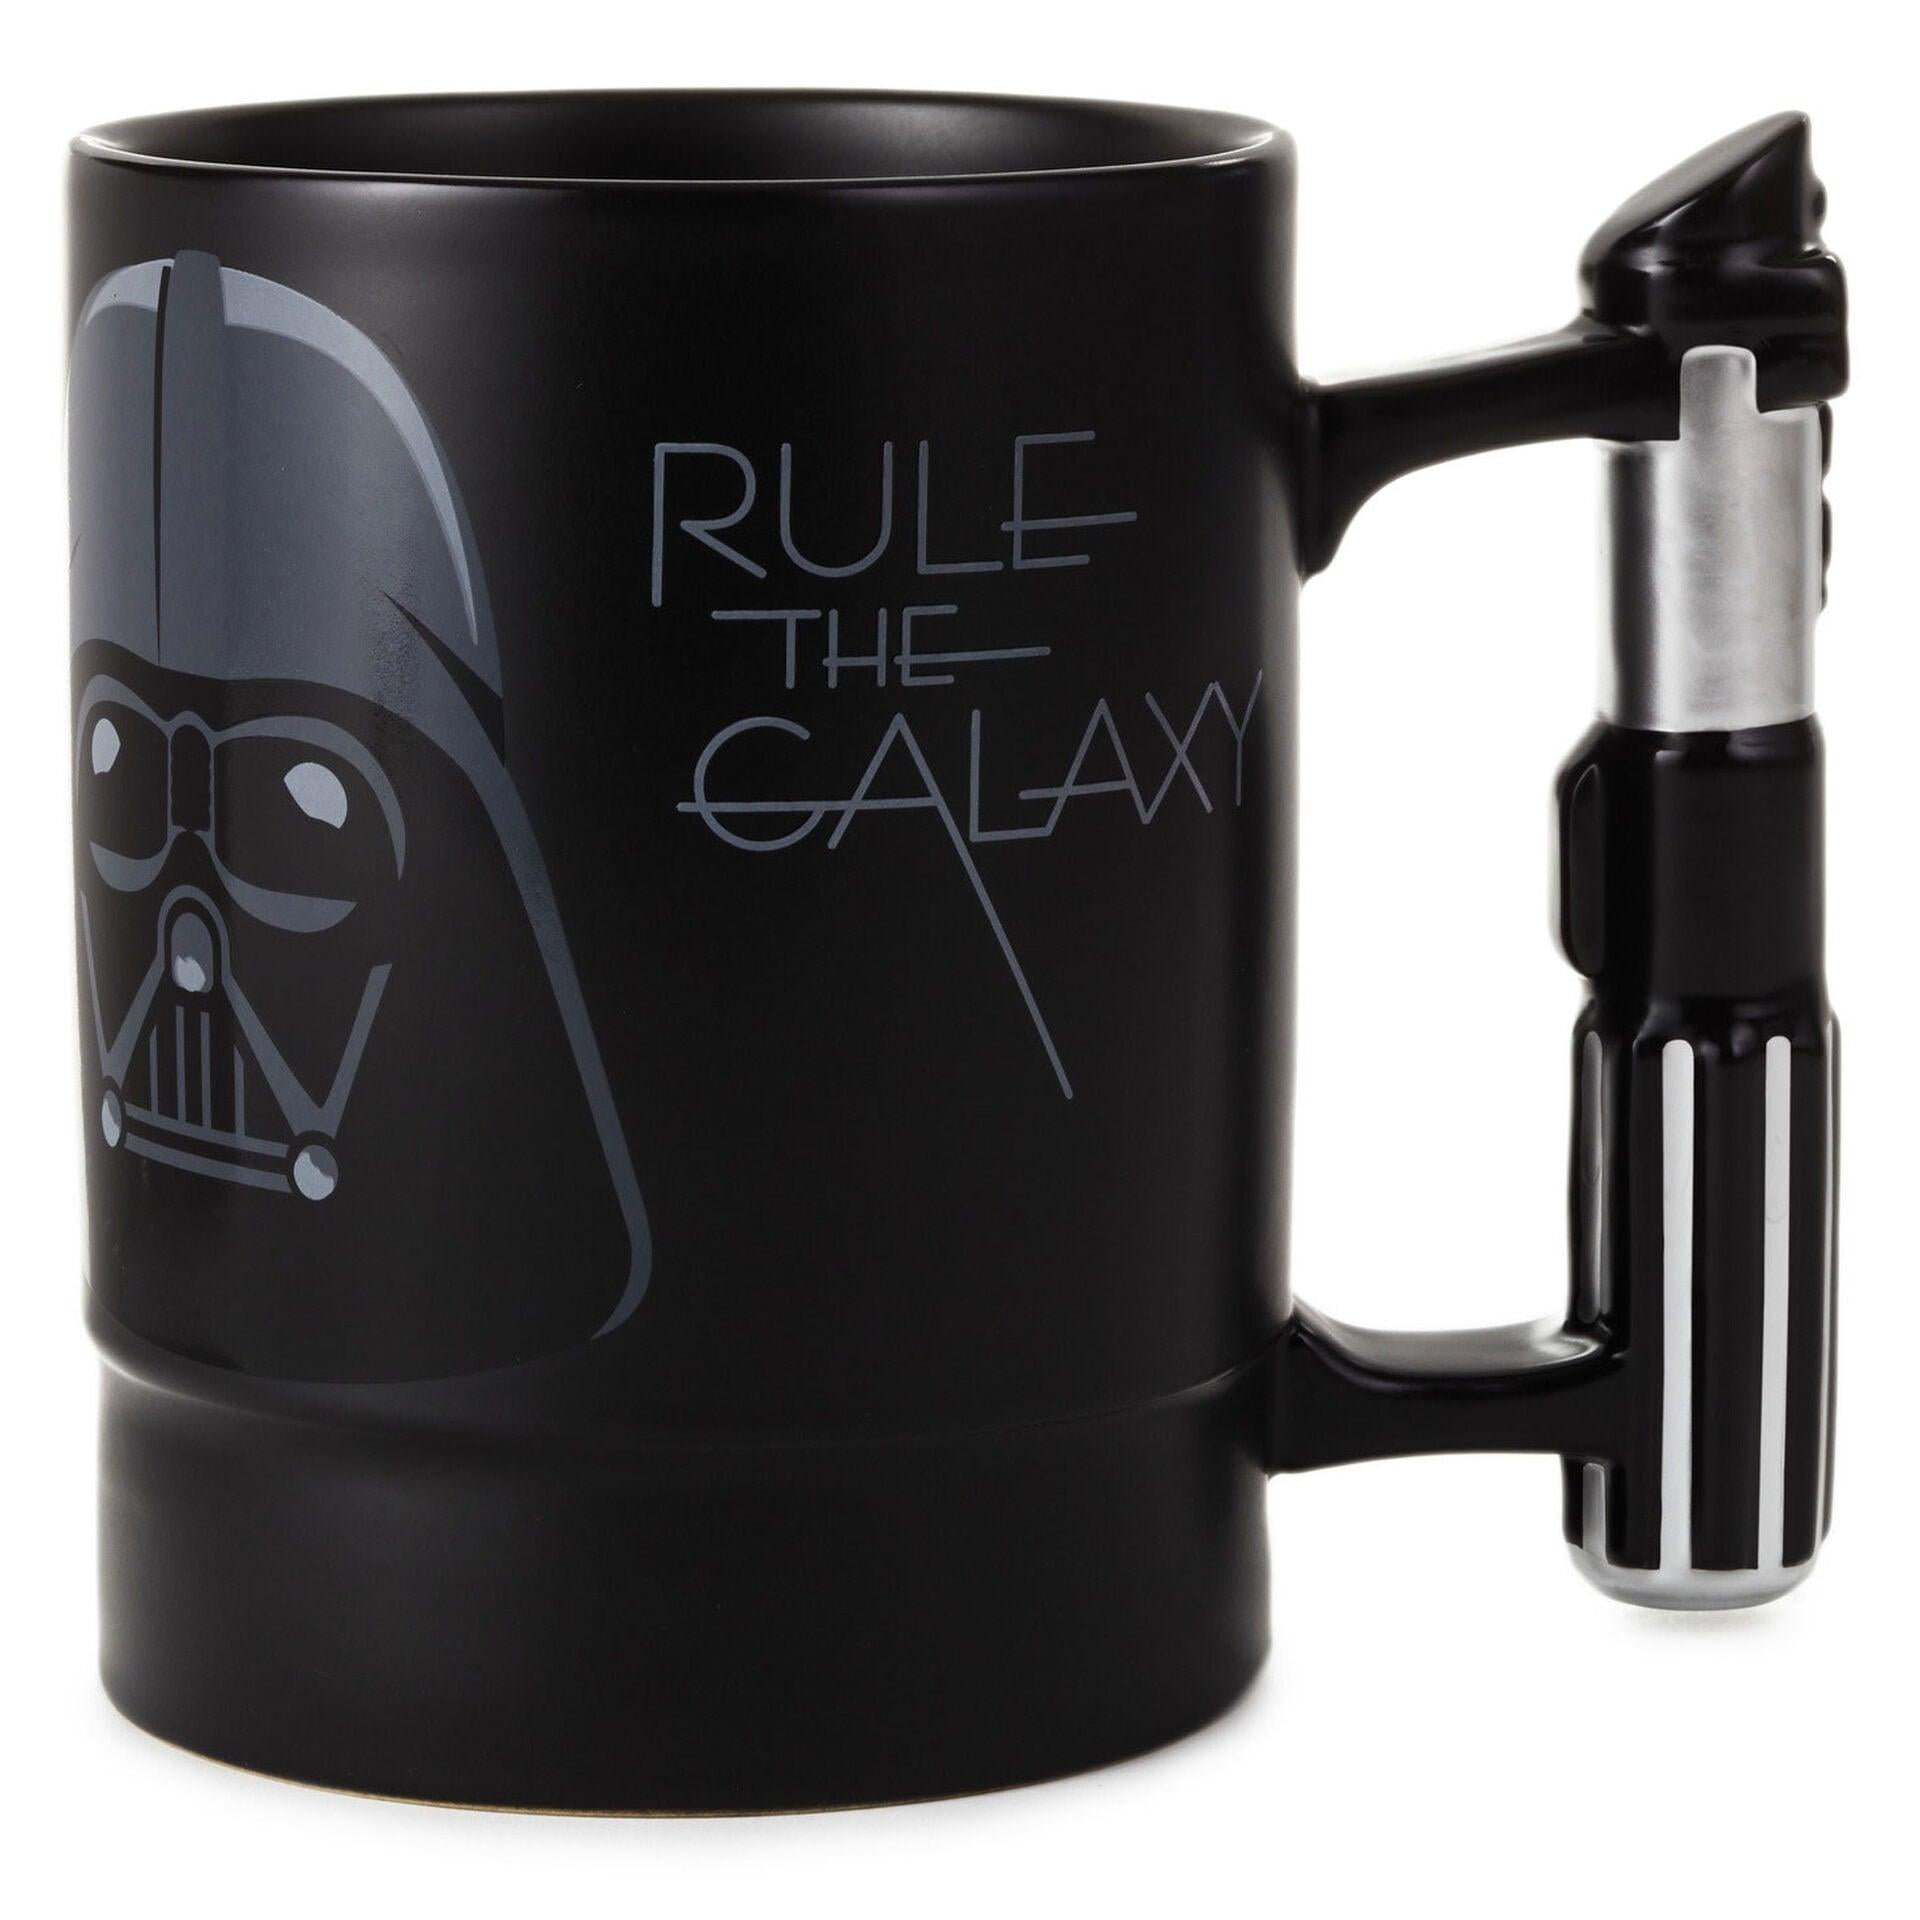 Star Wars Stormtrooper Fight for the Empire Black Ceramic Mug/Cup